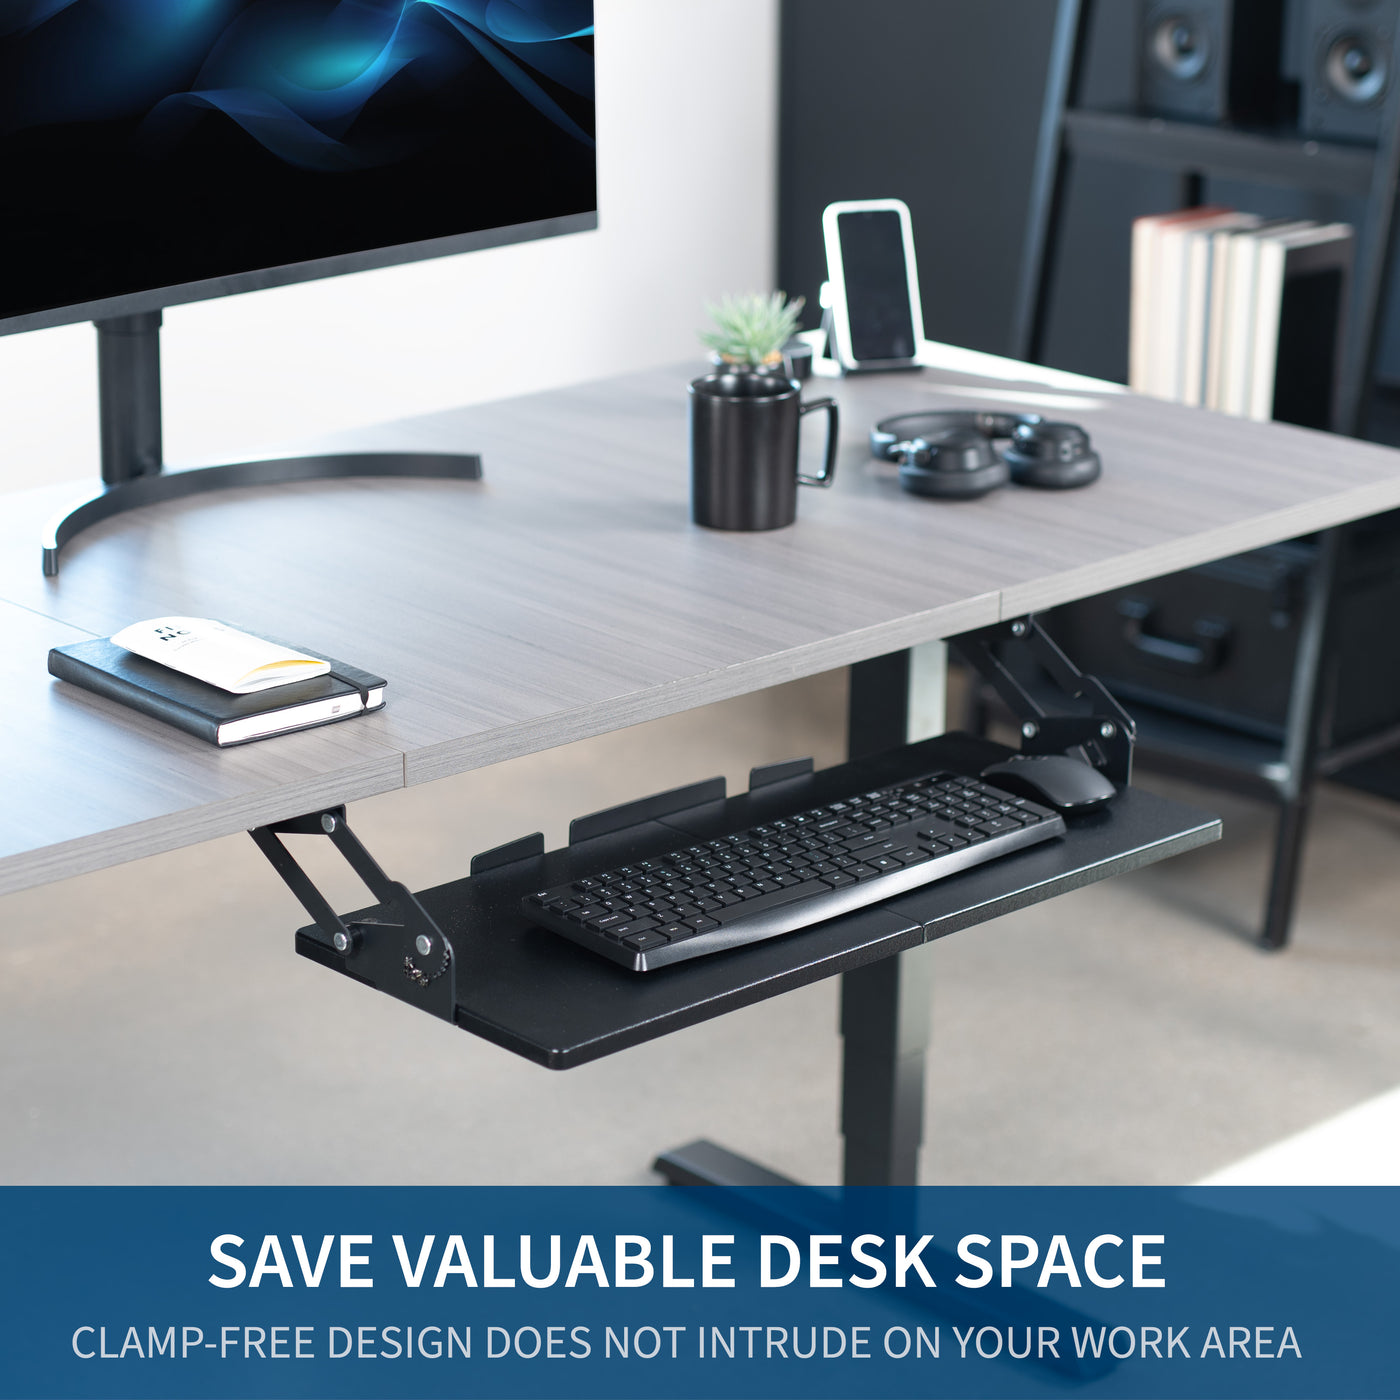 Convenient design to maintain a tidy modern workspace once you are done working for the day.